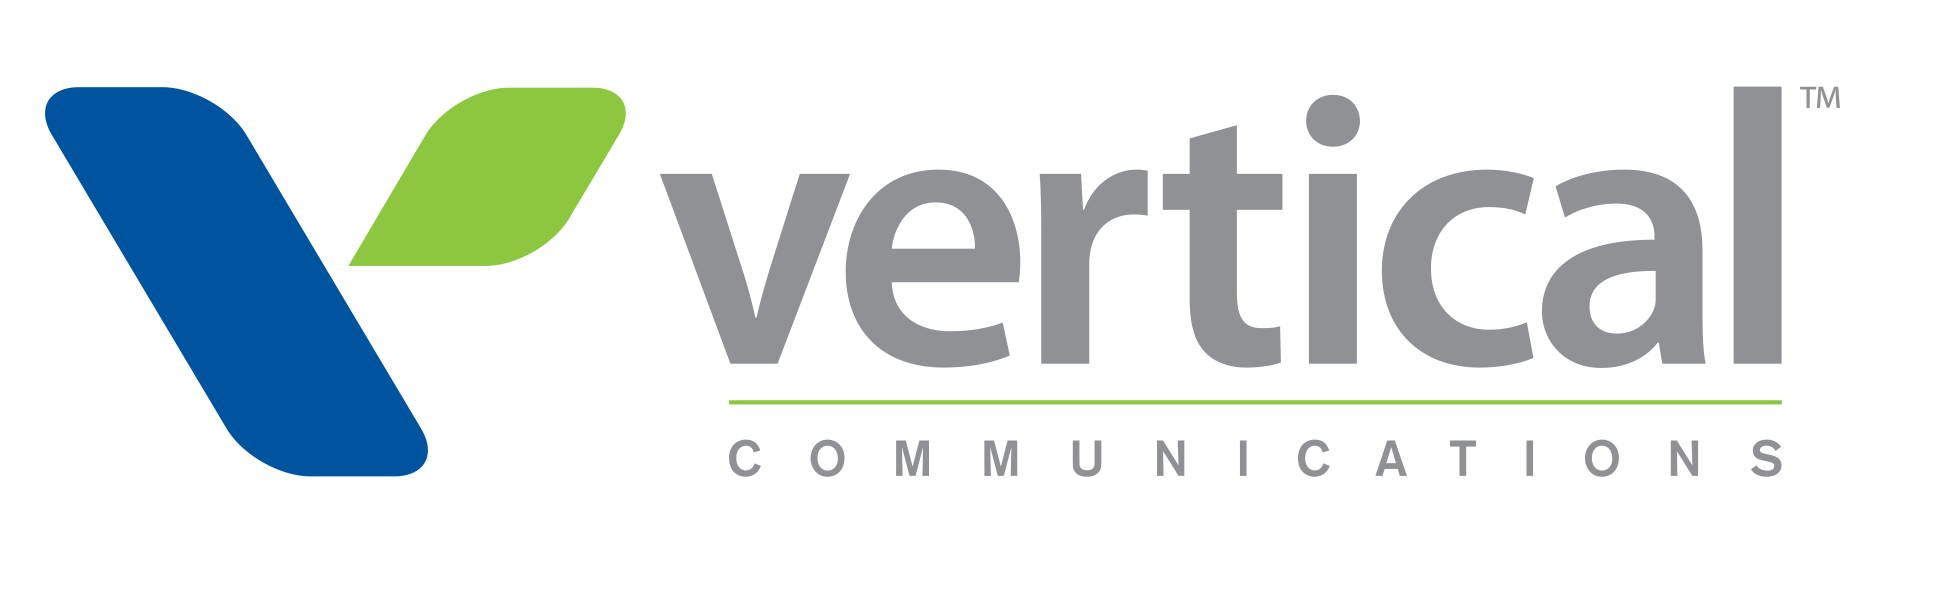 VERTICAL_LOGO_COLOR_GRAY_COMM.png